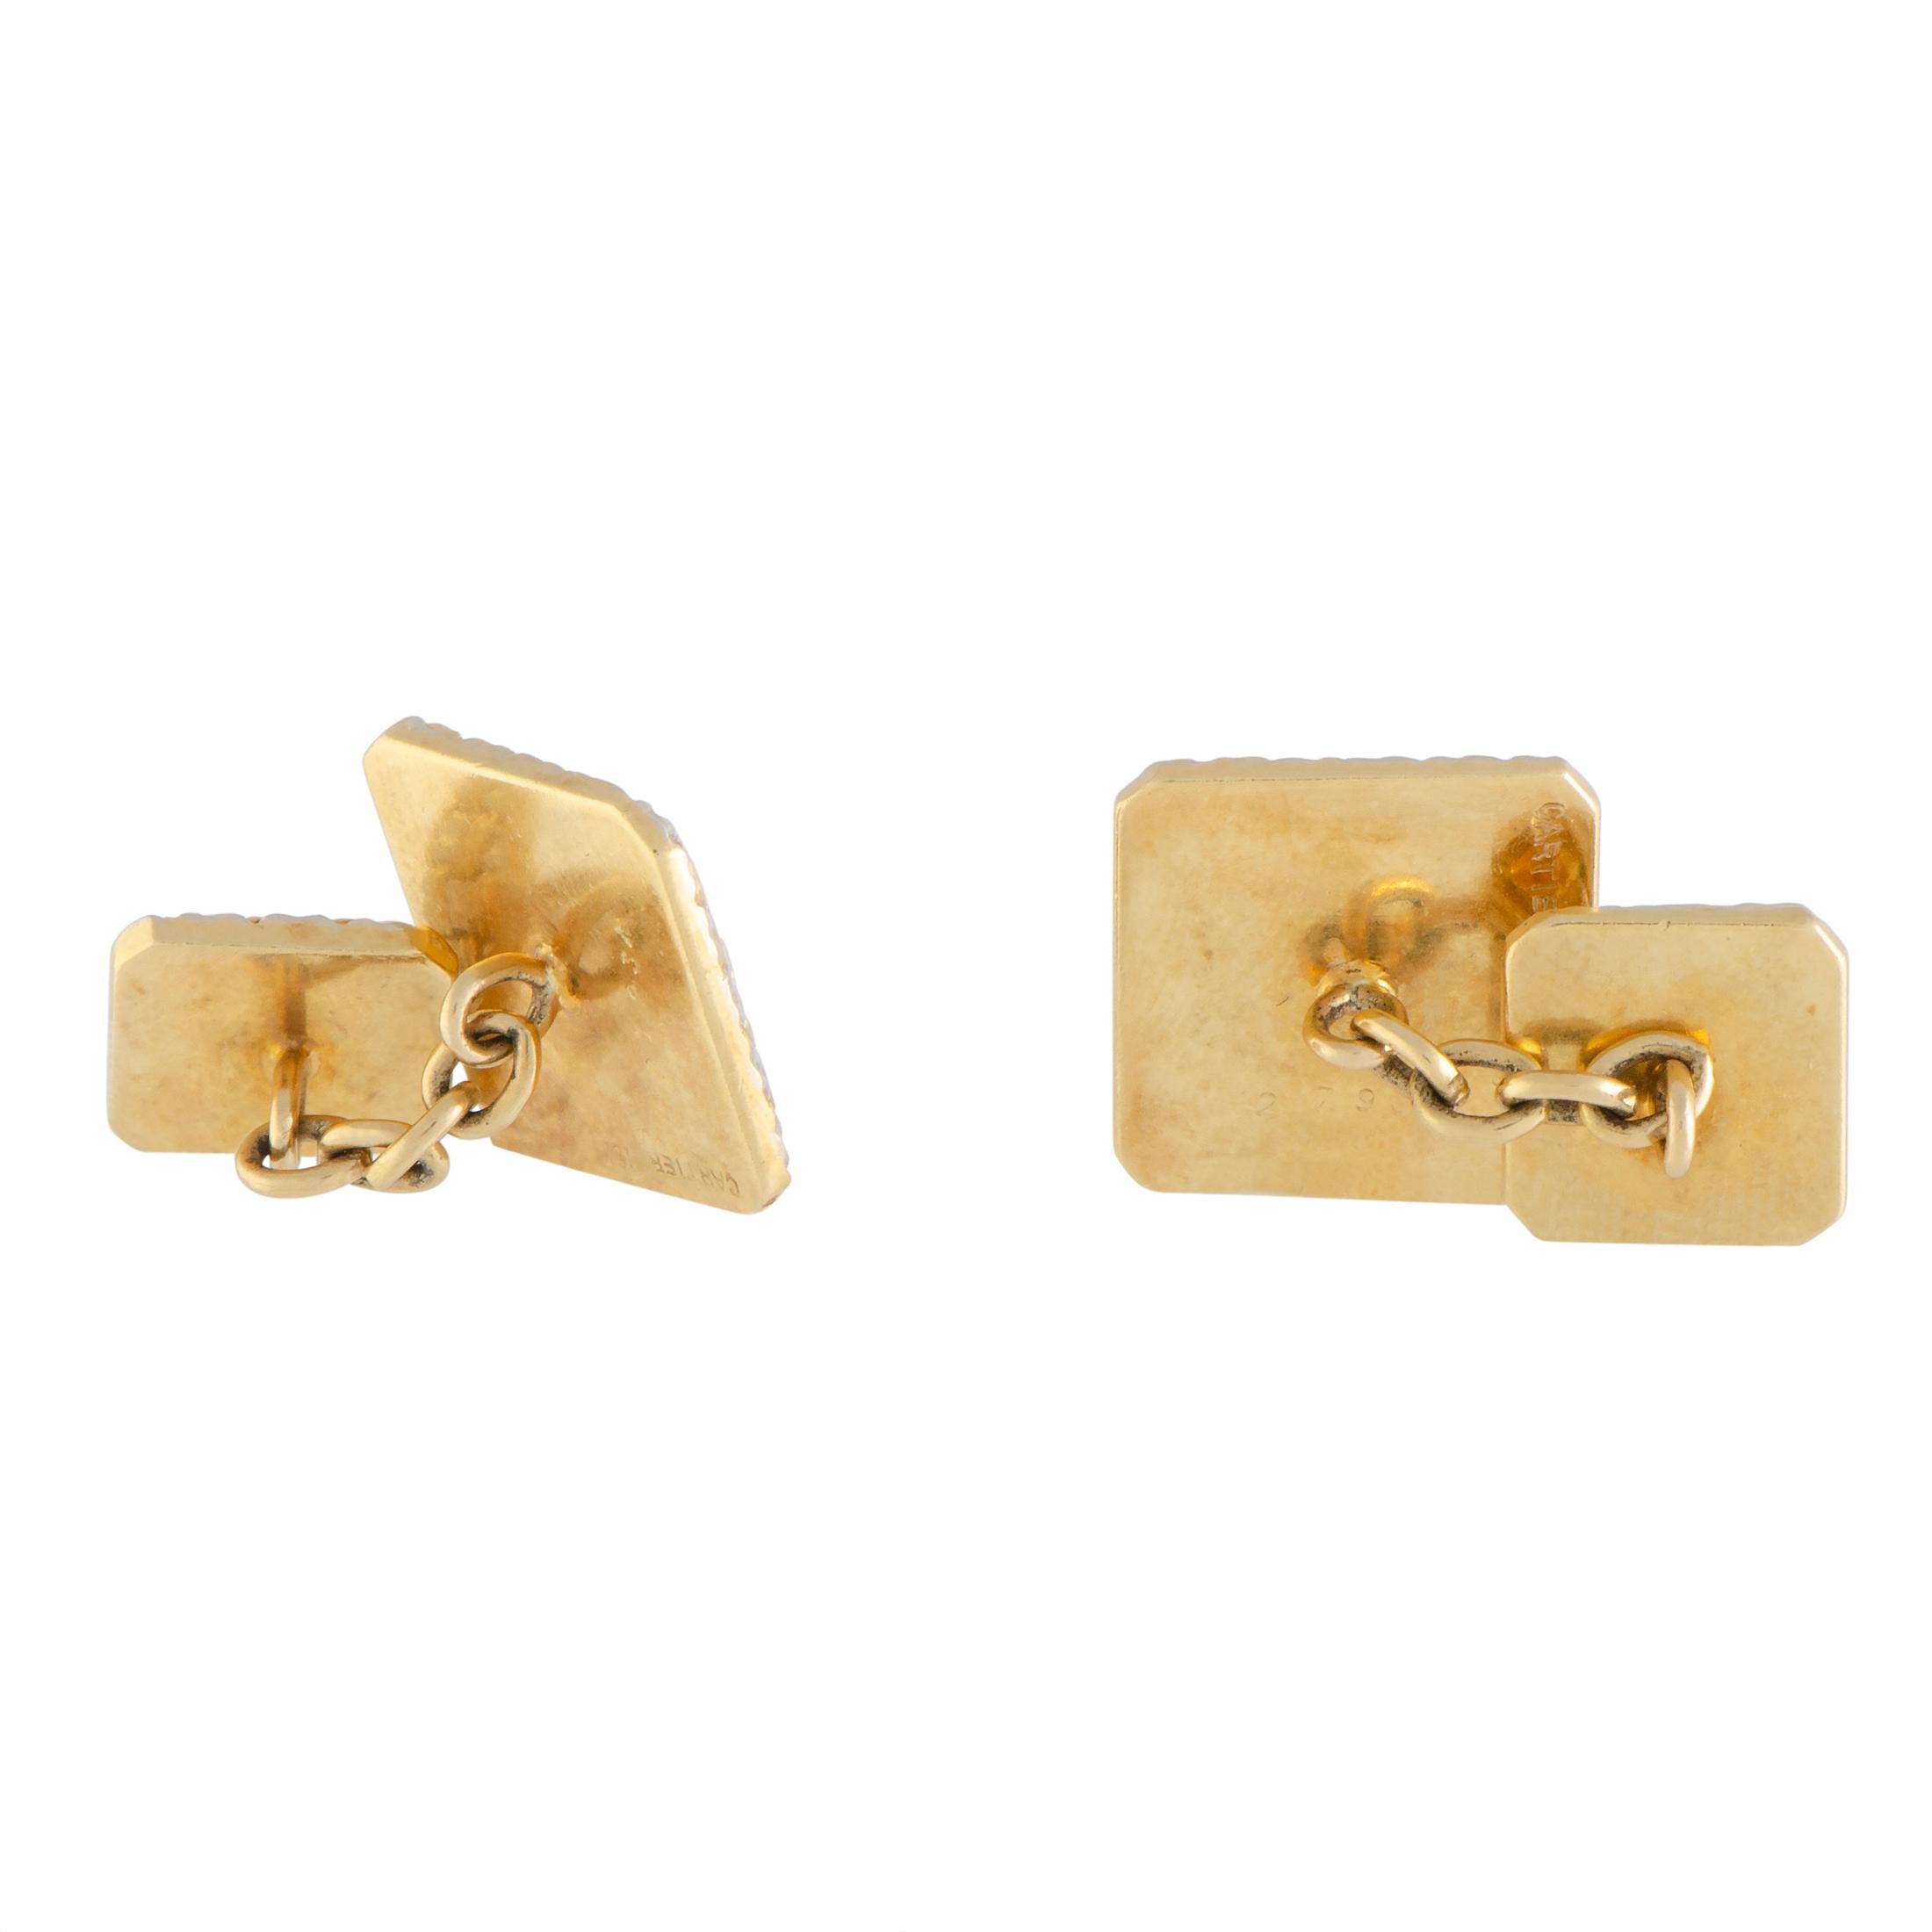 Boasting a stunningly prestigious “woven” design that compels with its attractive yet distinctly understated appeal, these exquisite vintage cufflinks offer an exceptionally classy appearance. The pair is presented by Cartier and crafted from 18K